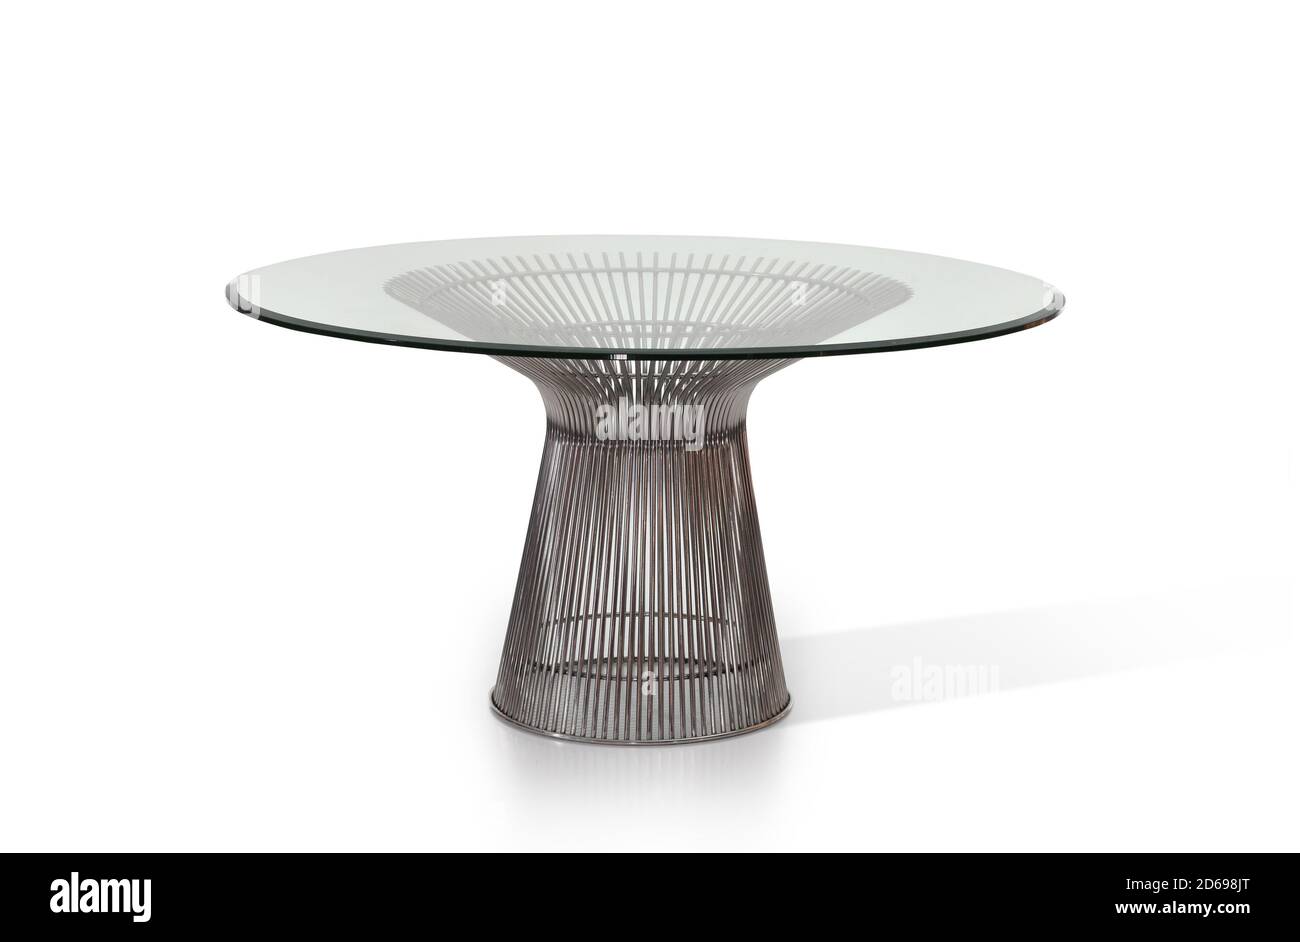 Contemporary round shape dining table Stock Photo